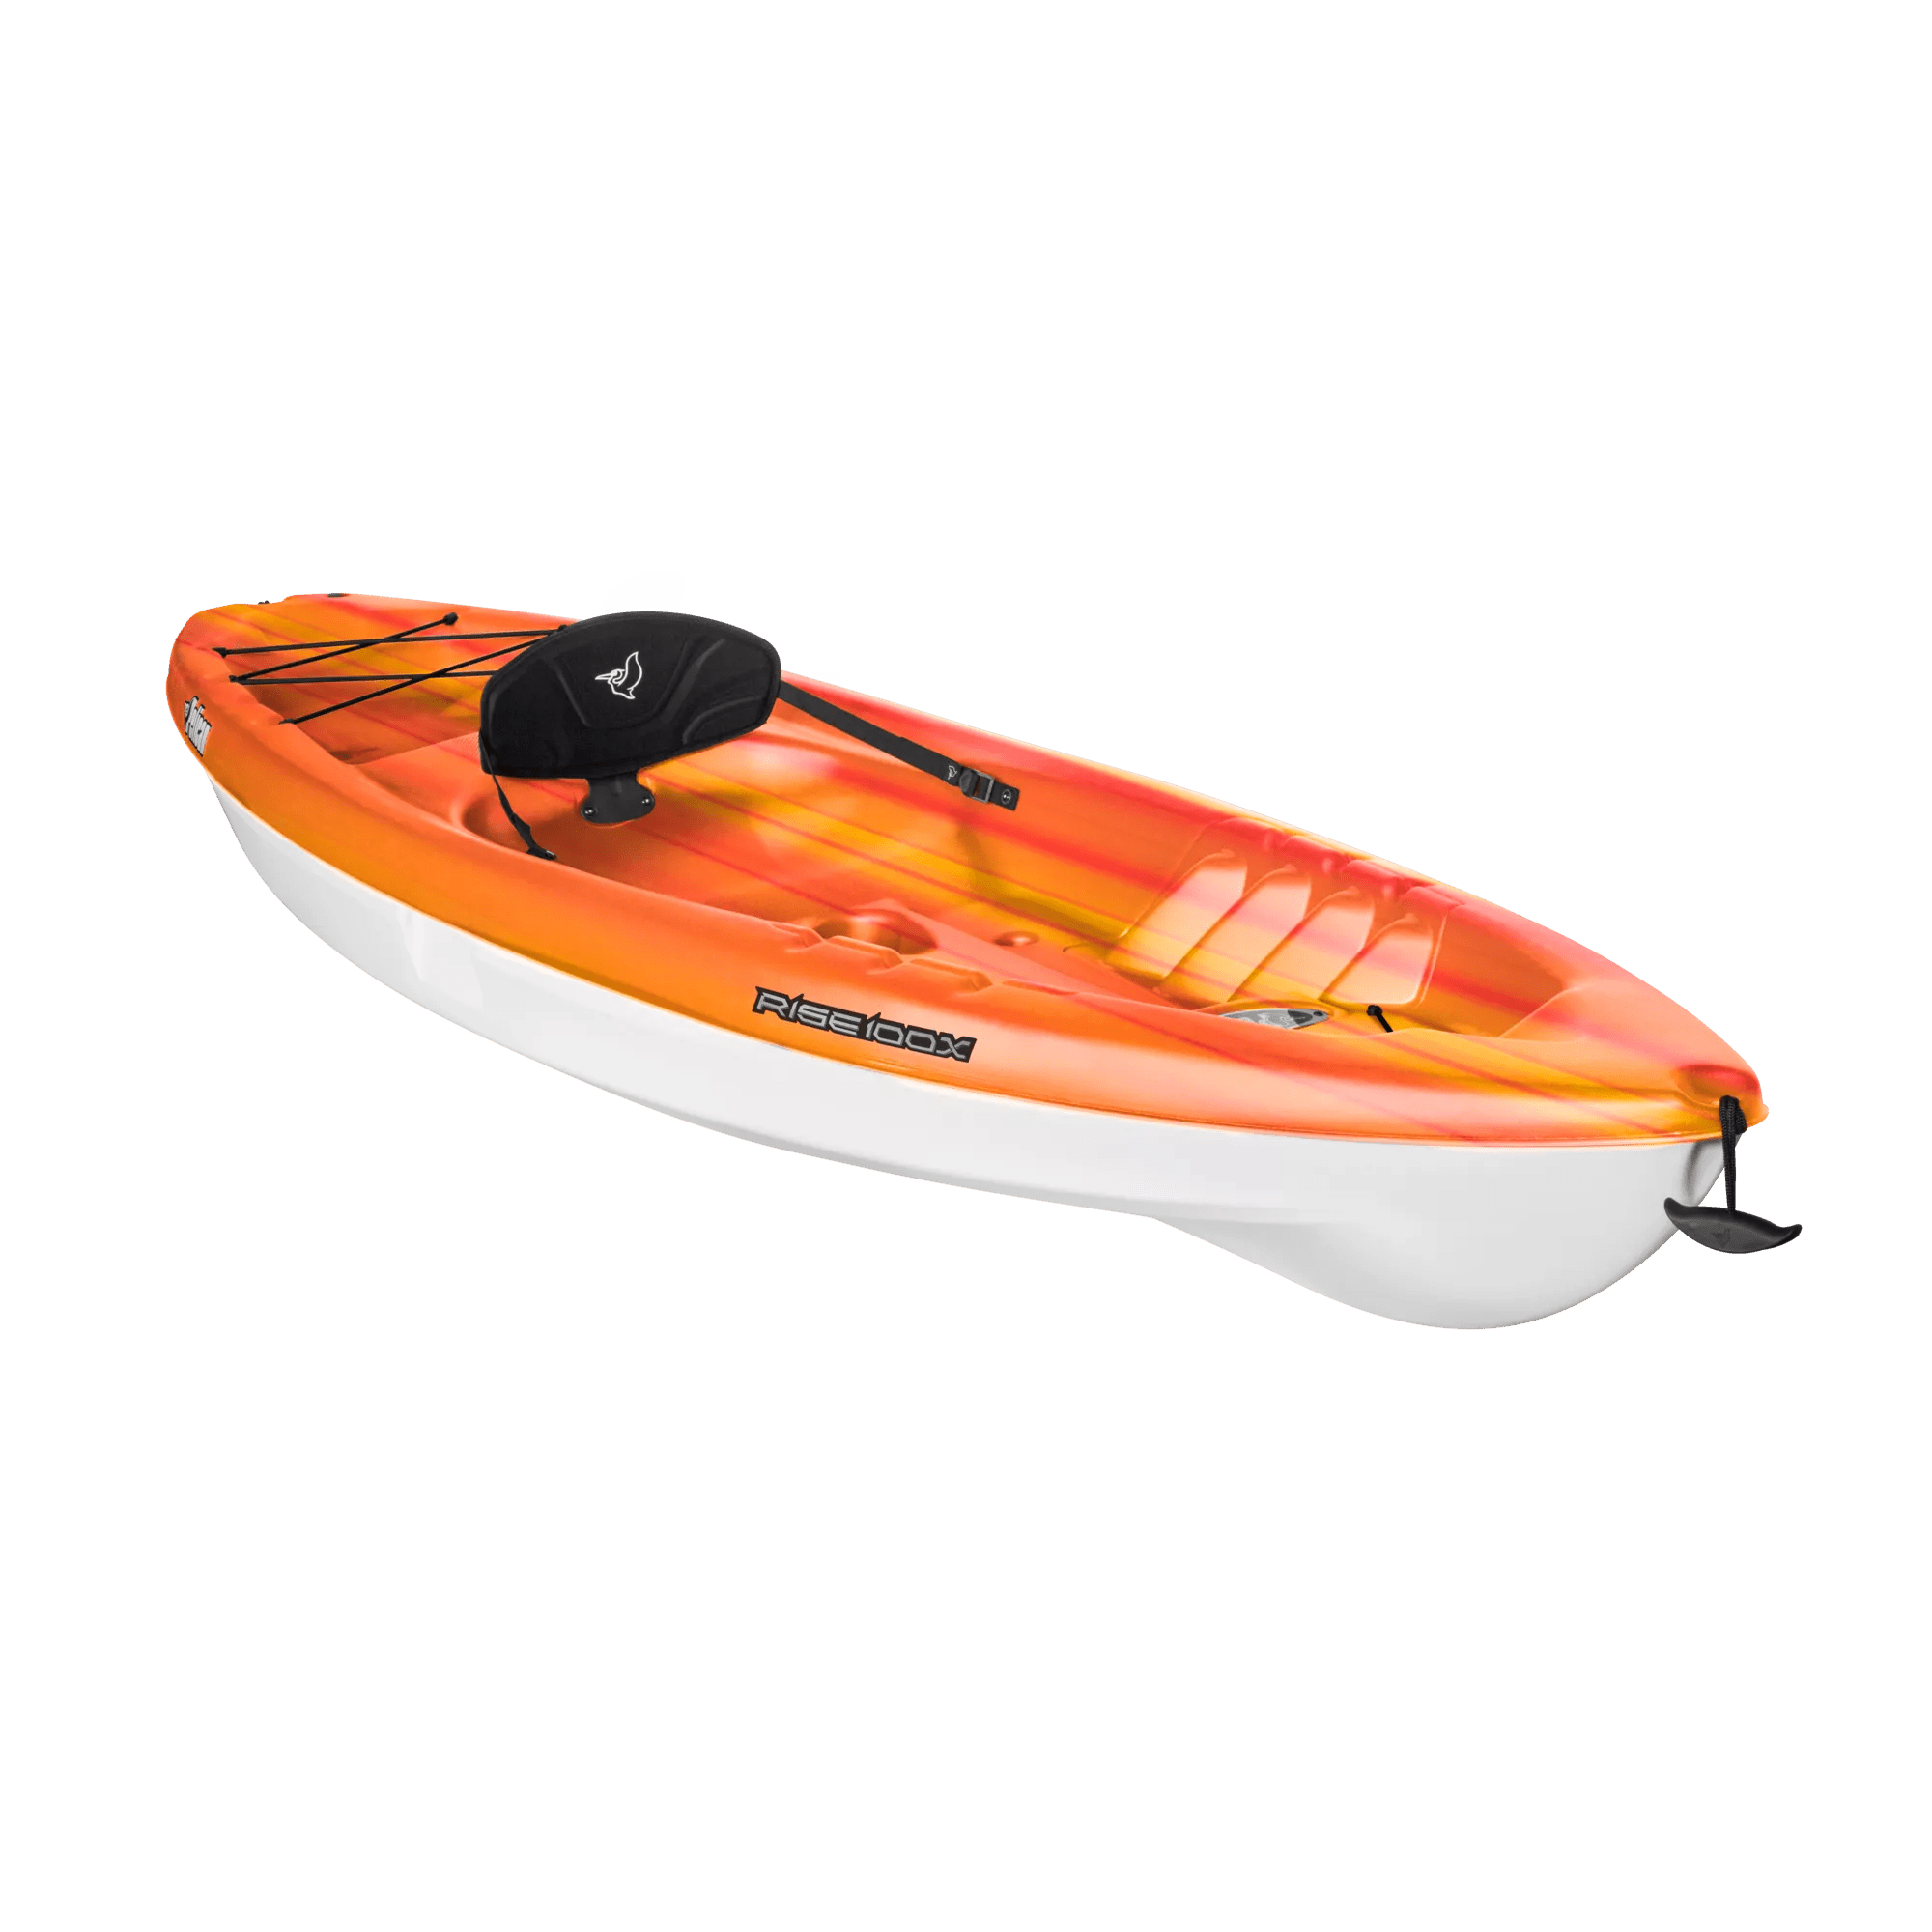 Explore the Beauty of Nature with the Pelican Rise Sit-In Kayak